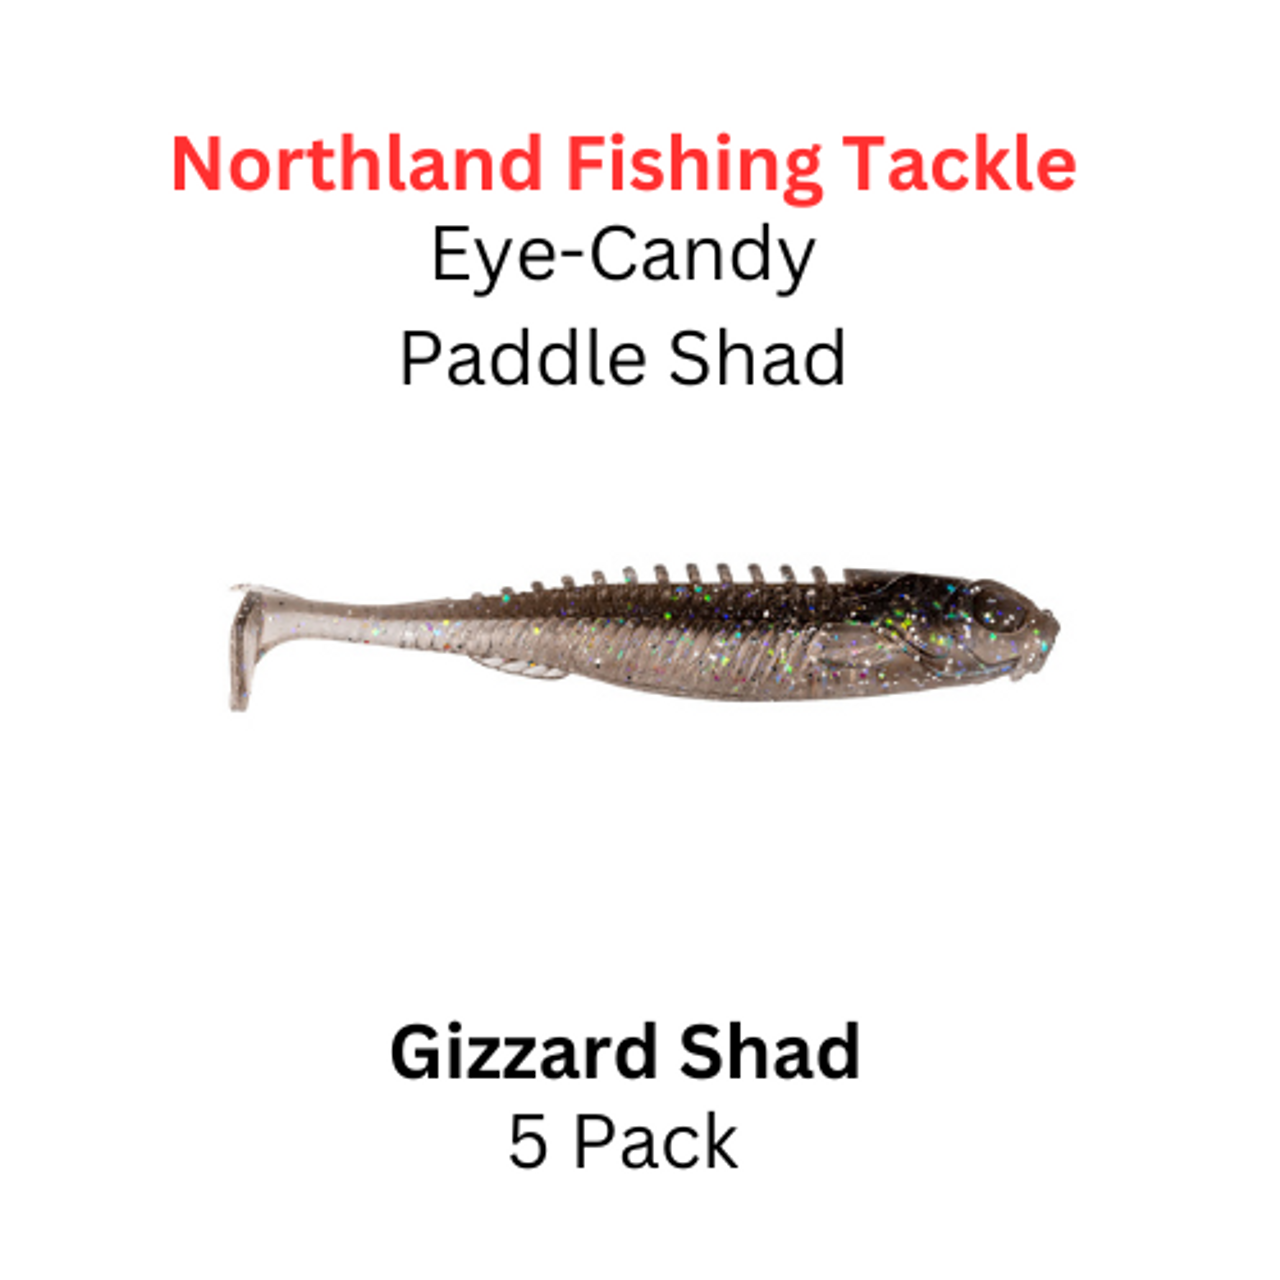 NORTHLAND FISHING TACKLE Eye Candy Paddle Shad Gizzard Shad